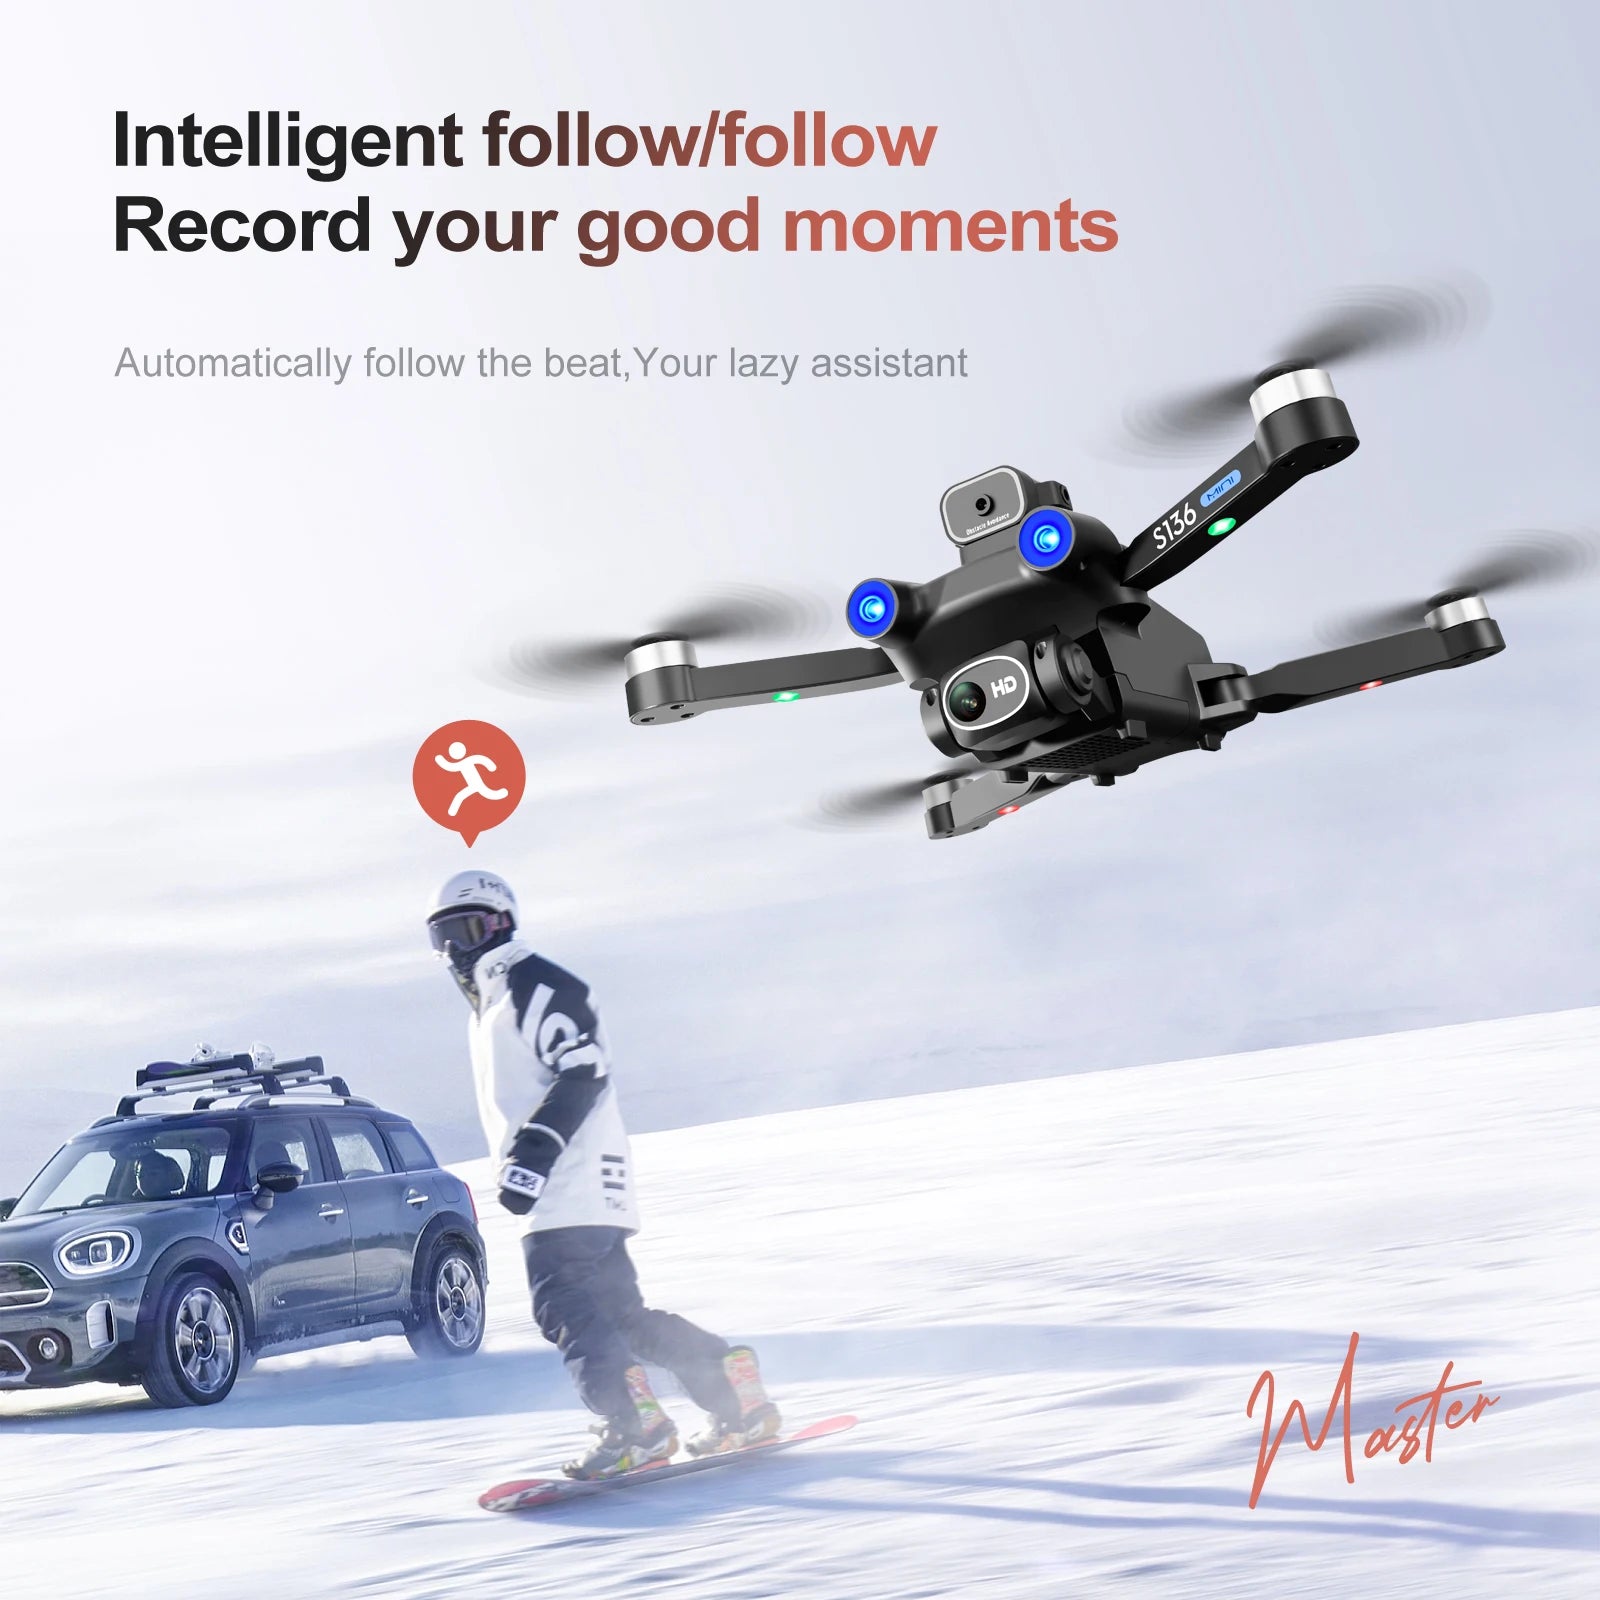 S136 GPS Drone, Intelligent followlfollow Record your good moments Automatically follow the beat, Your assistant HD I4